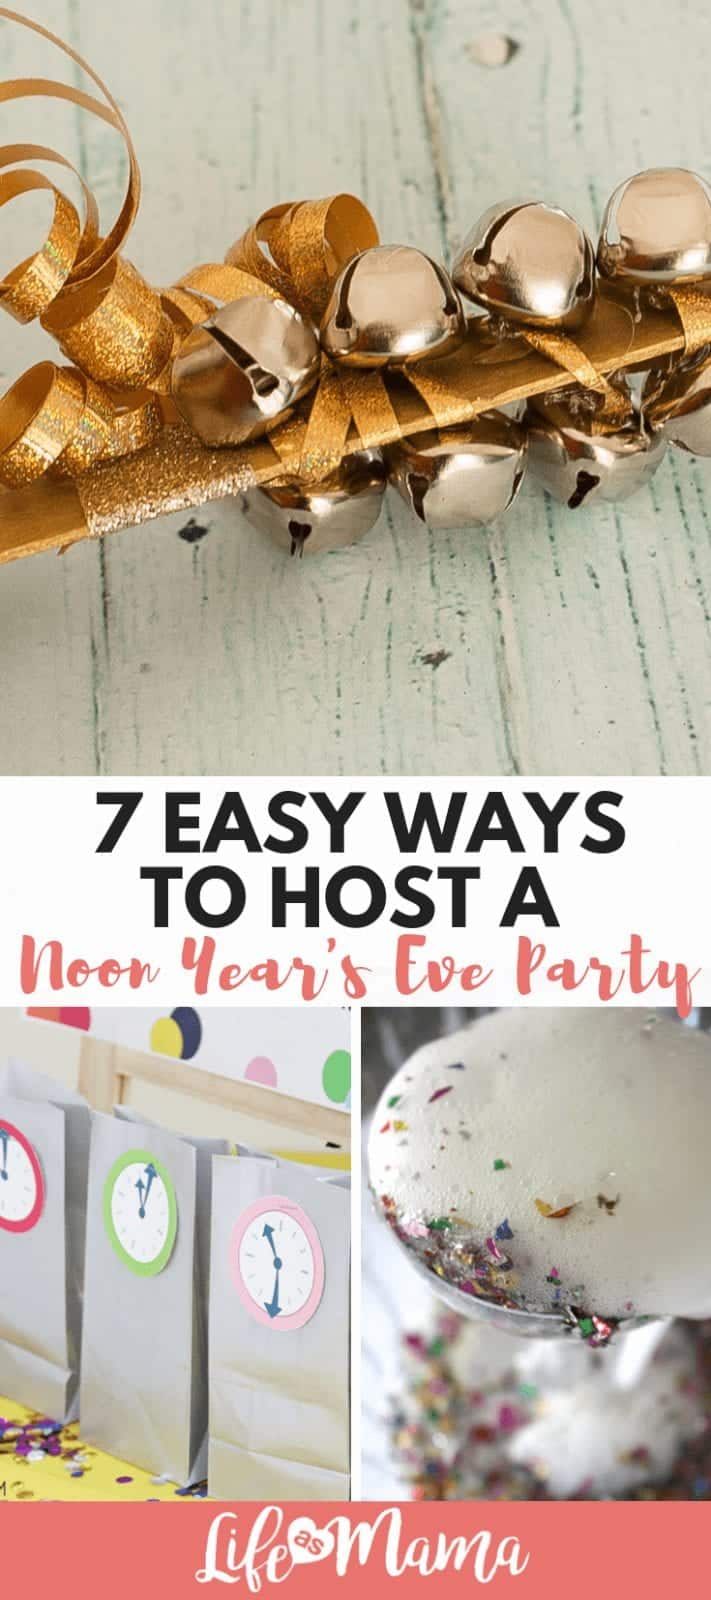 7 Easy Ways To Host A Noon Year's Eve Party